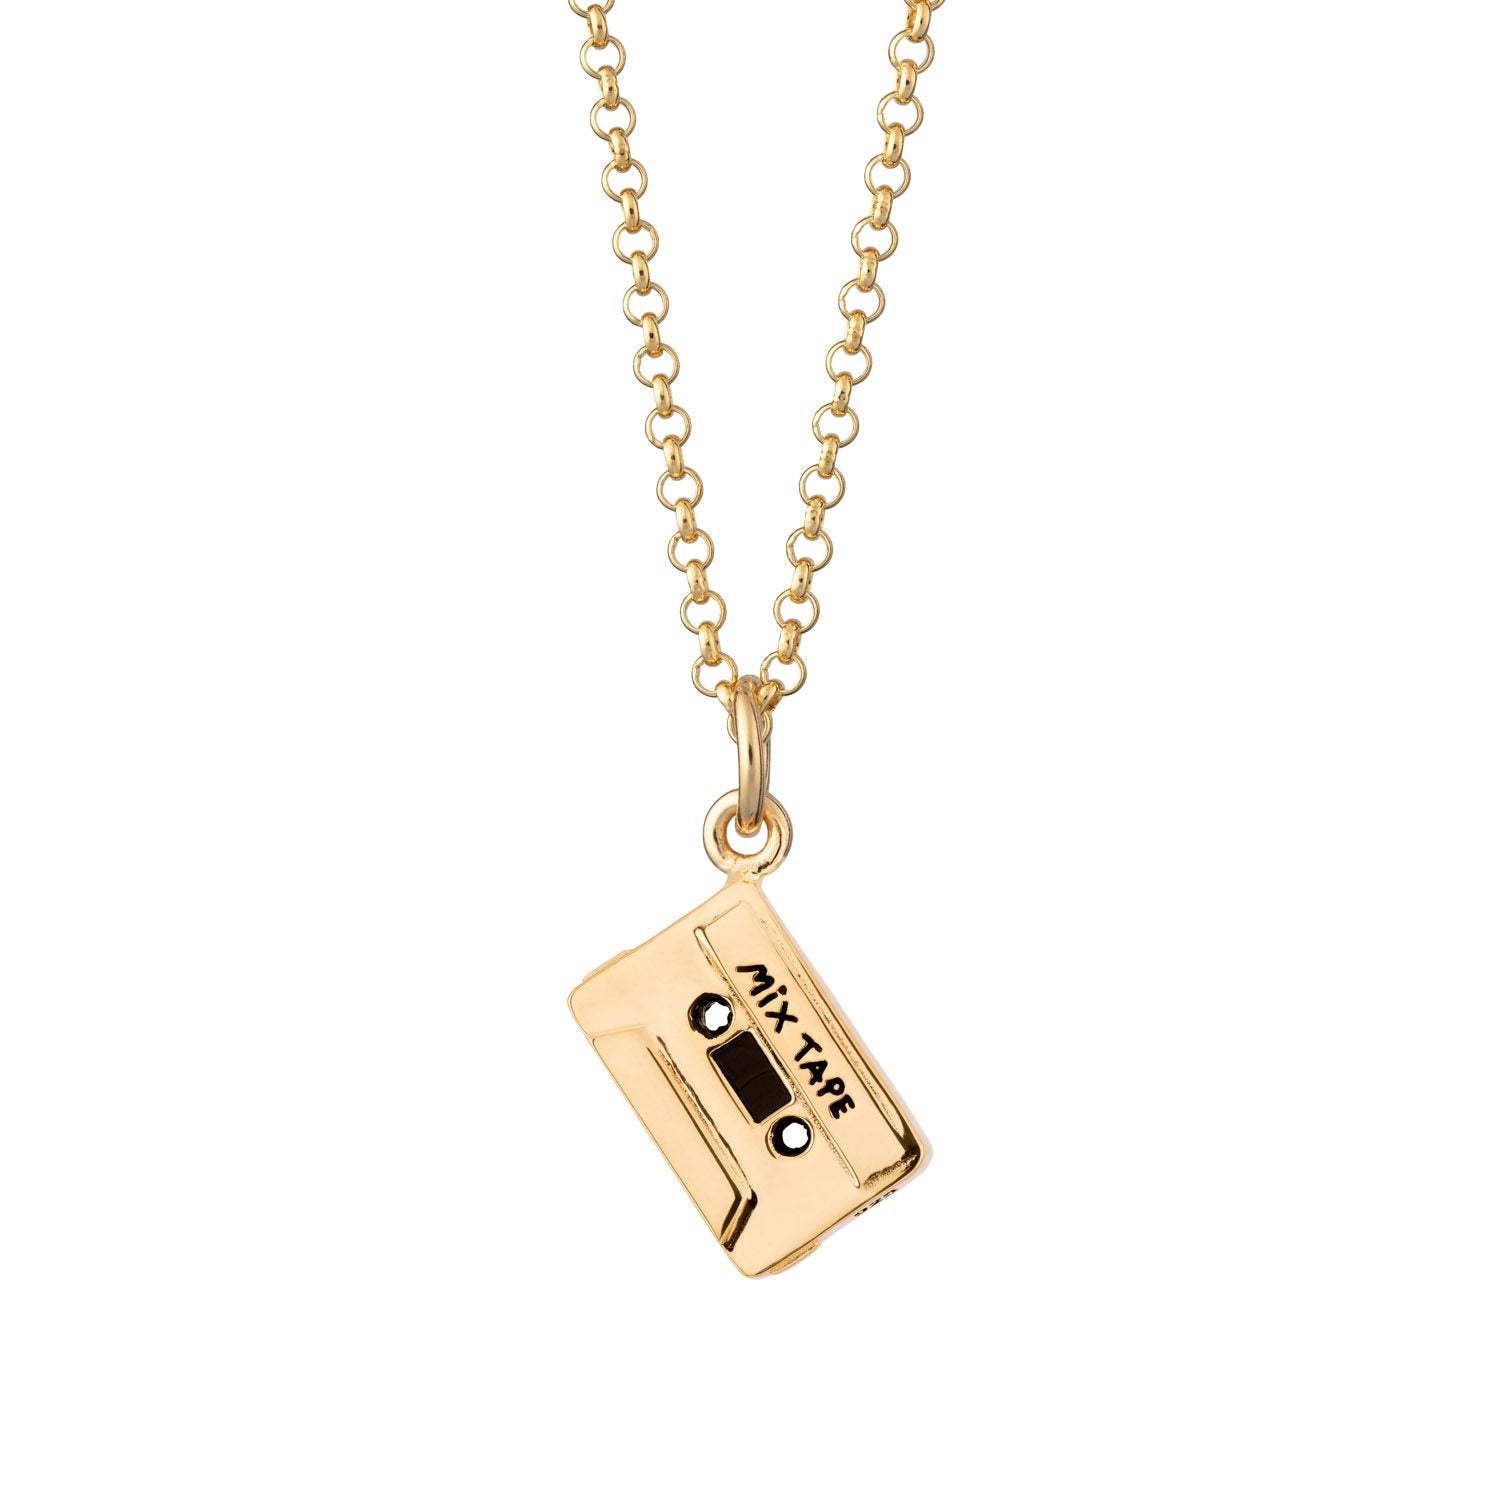  Mix Tape Necklace - by Scream Pretty